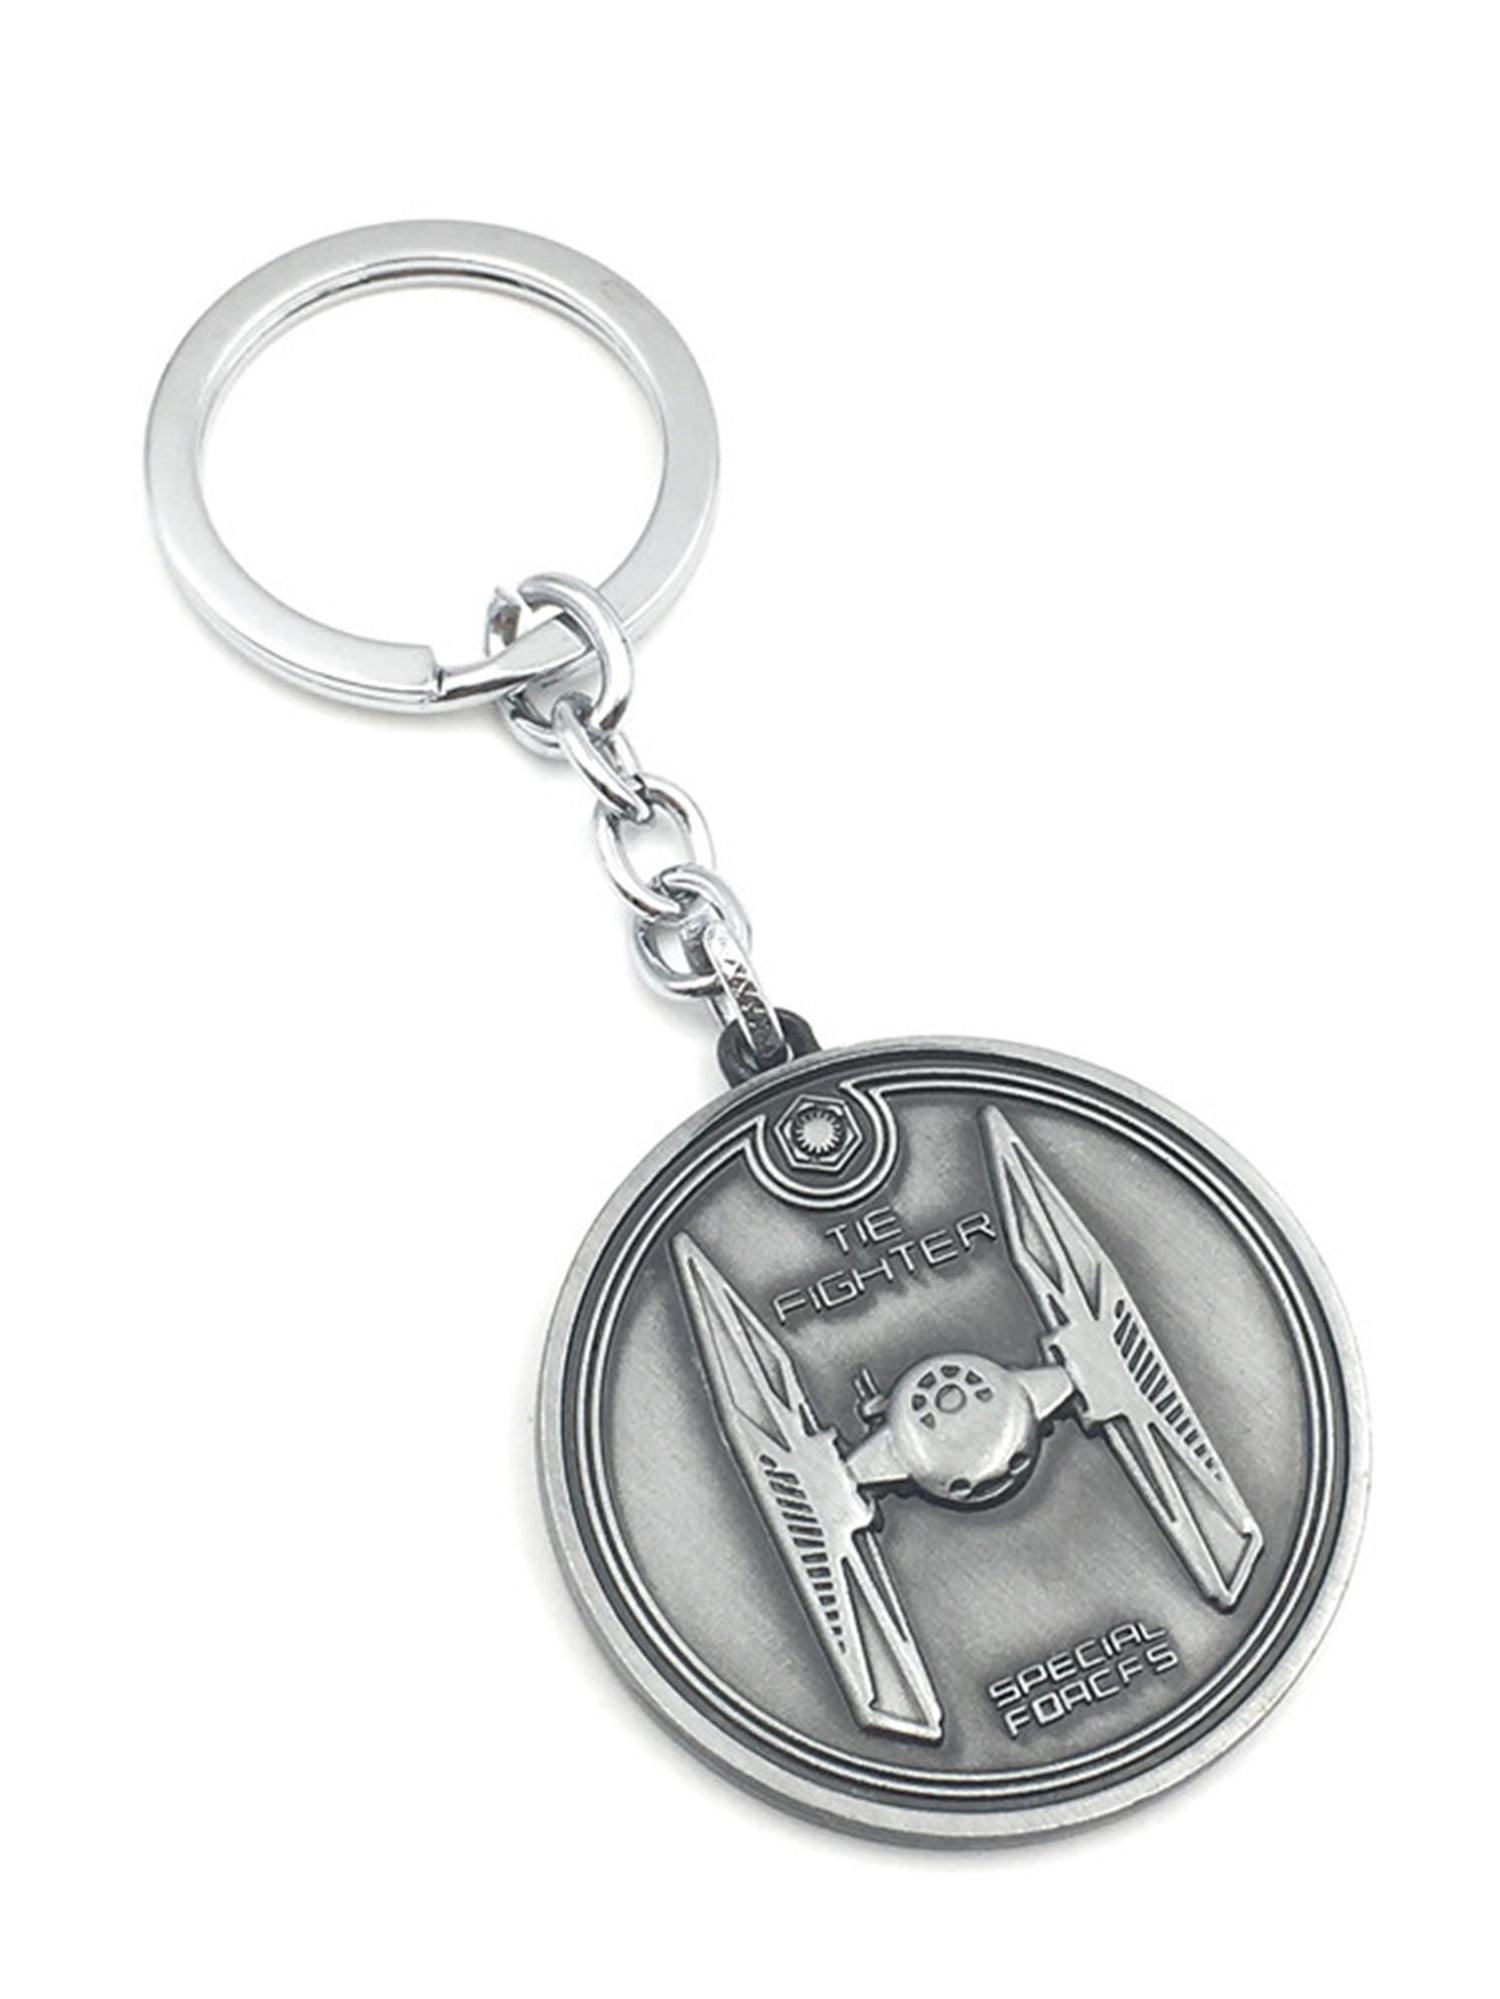 Superheroes Star Wars Tie Fighter Keychain for Autos, Home or Boat with  Gift Box - Walmart.com